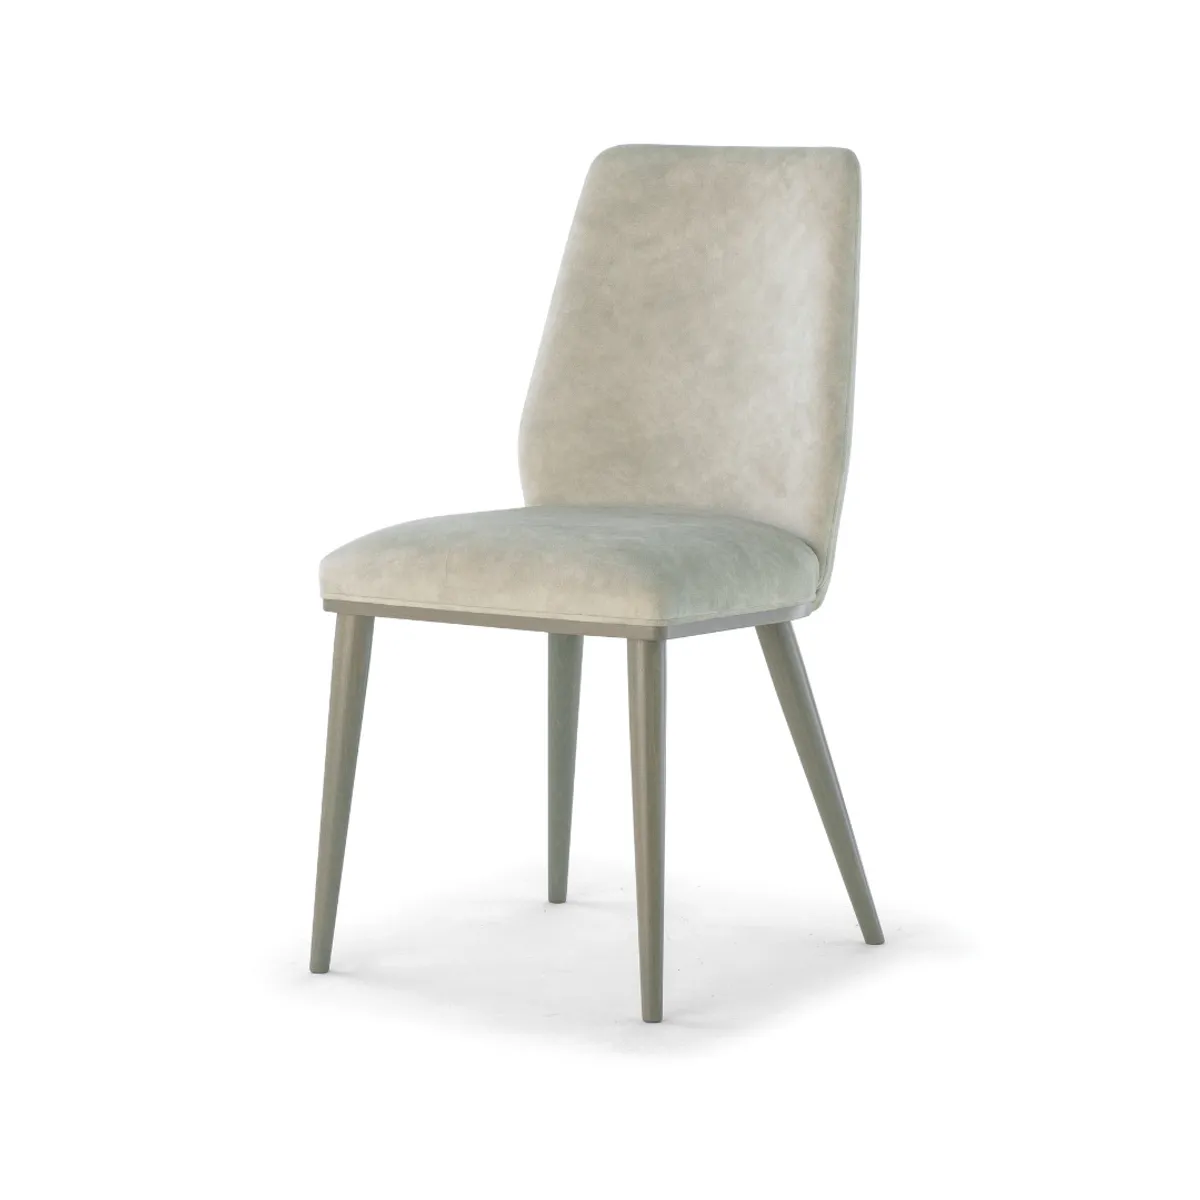 Nicelli side chair